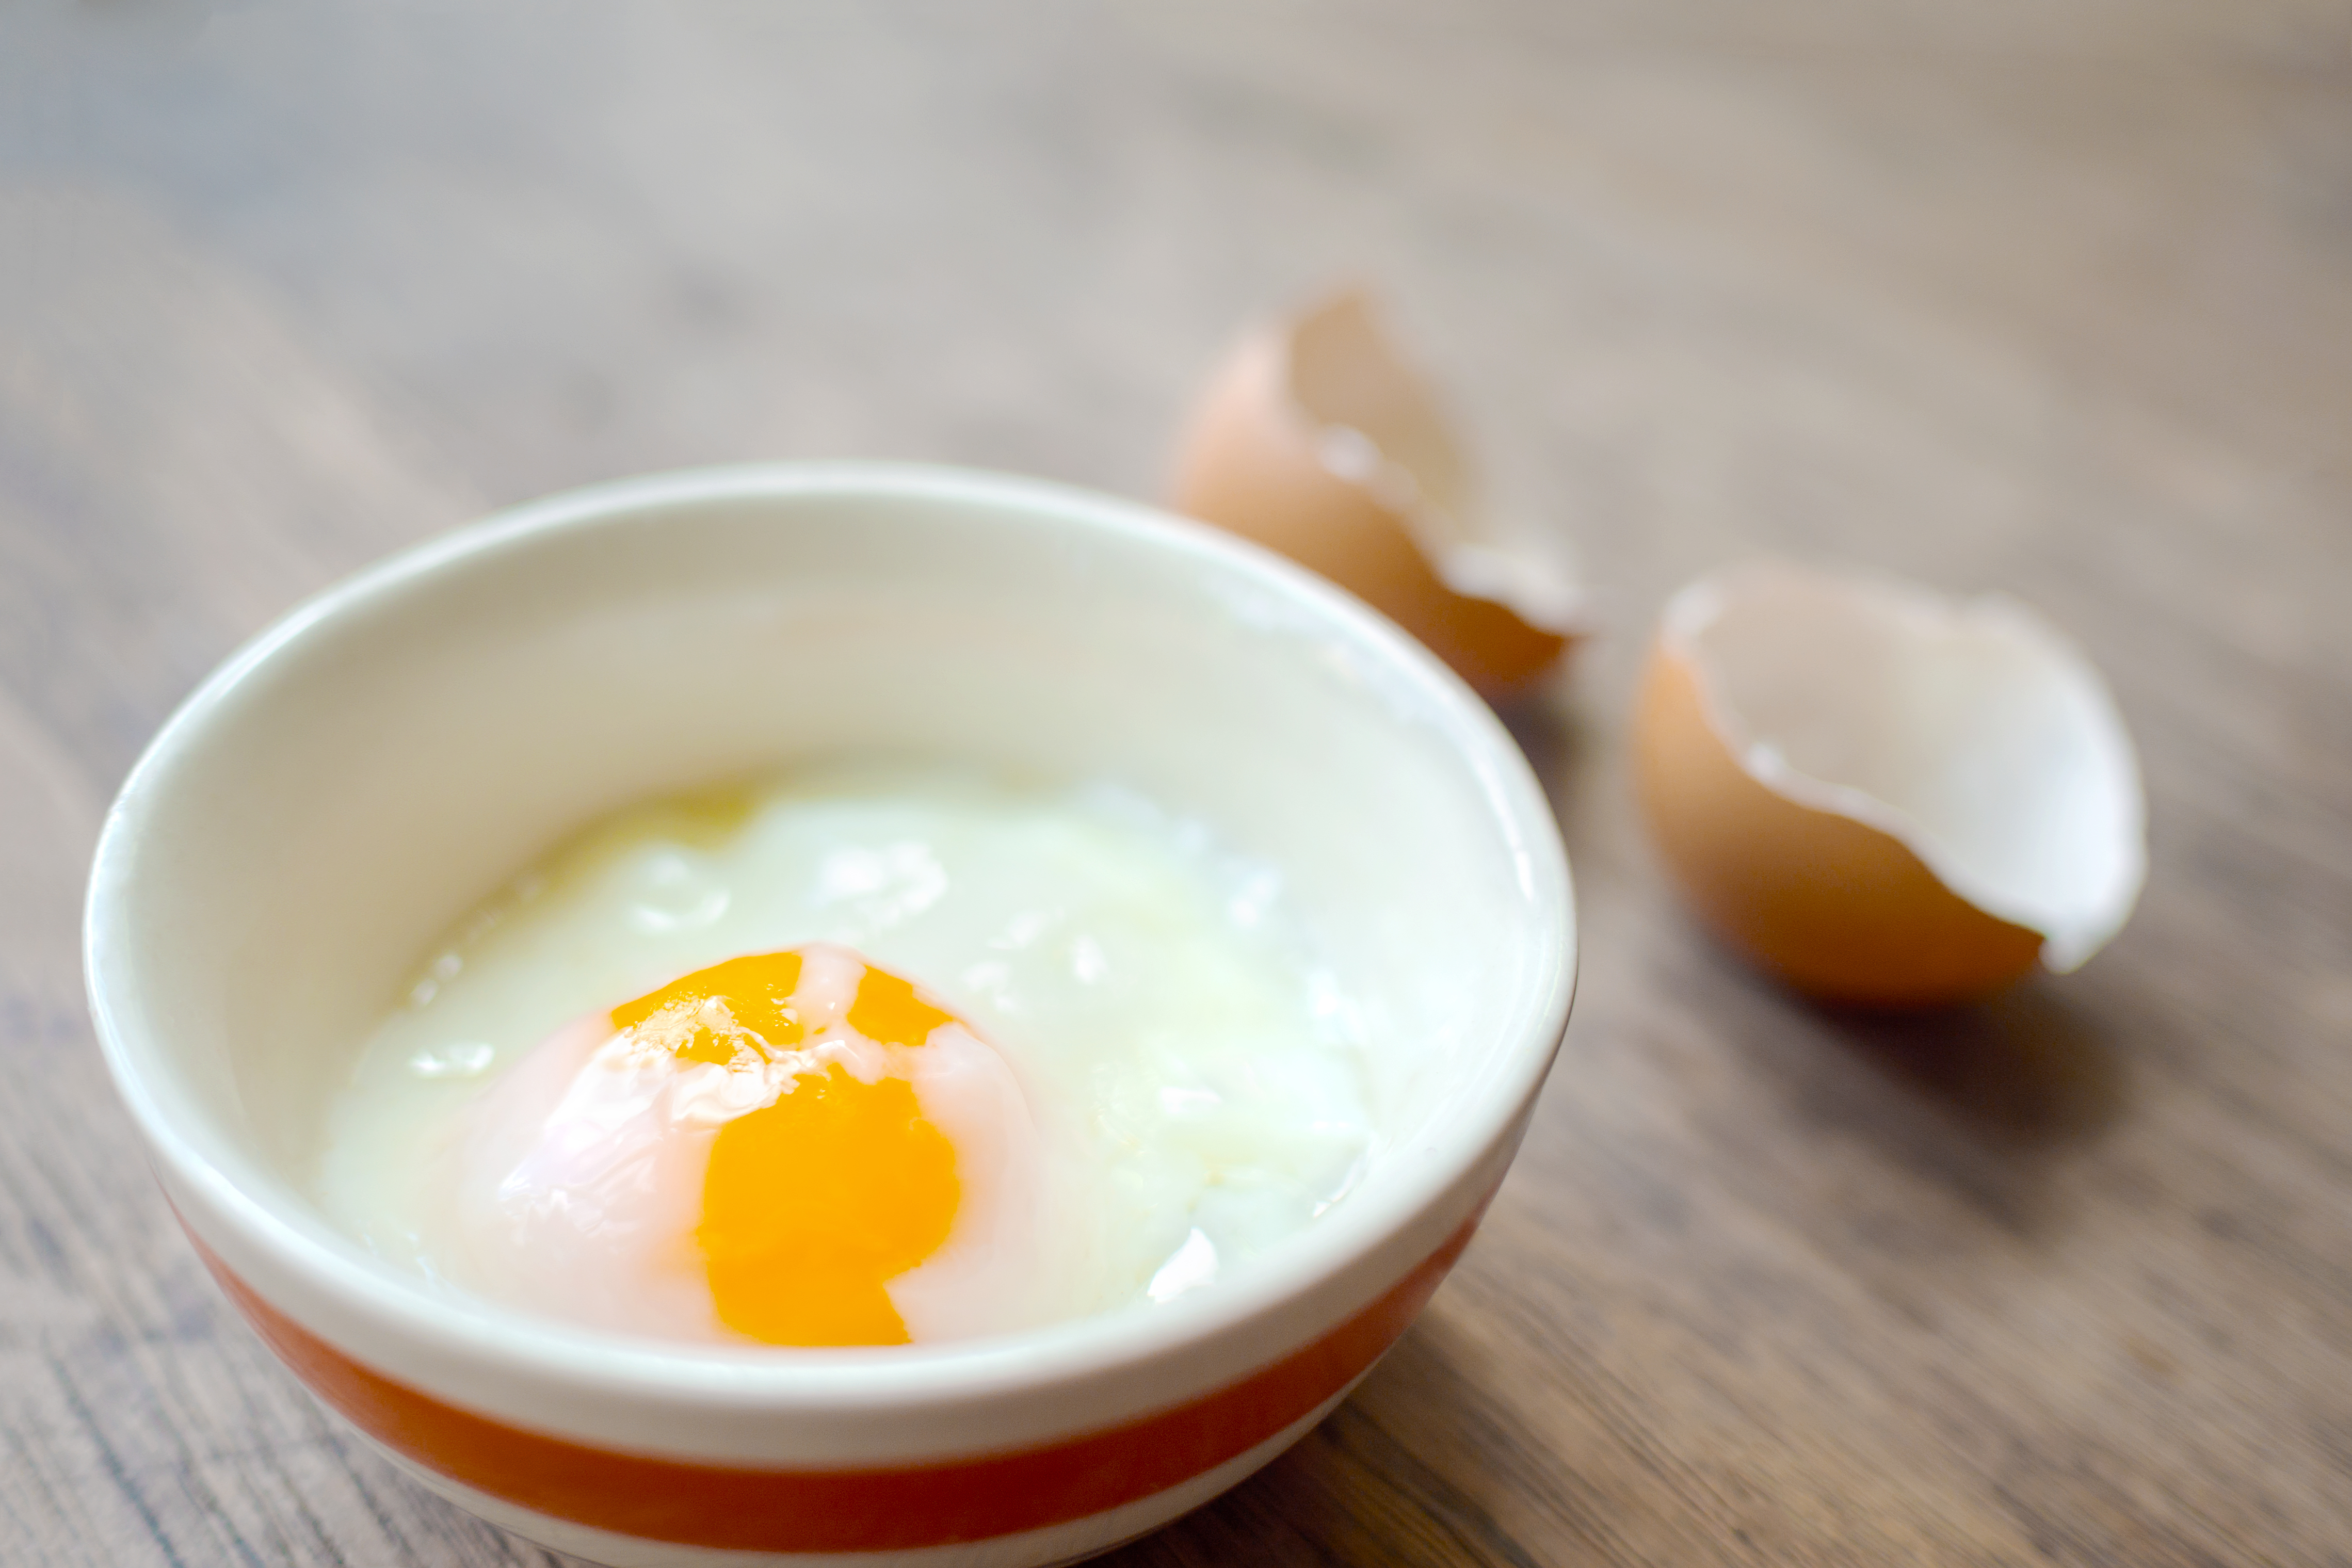 Eggs are highly nutritious and protein-dense food